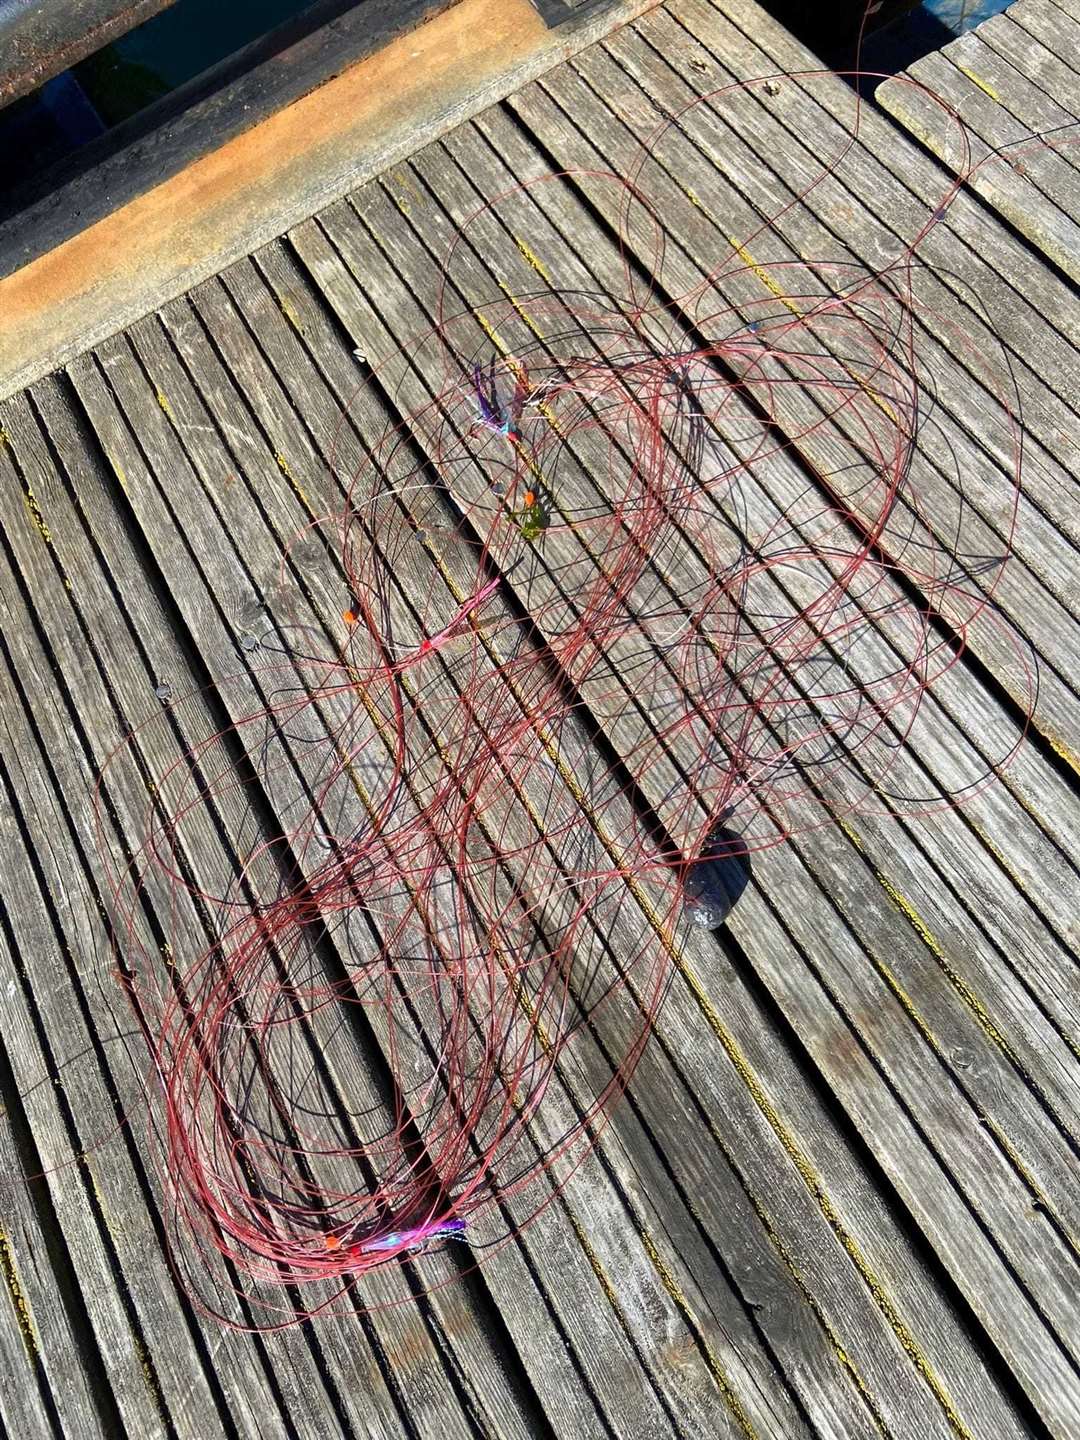 A discarded fishing line at Cromarty Harbour.